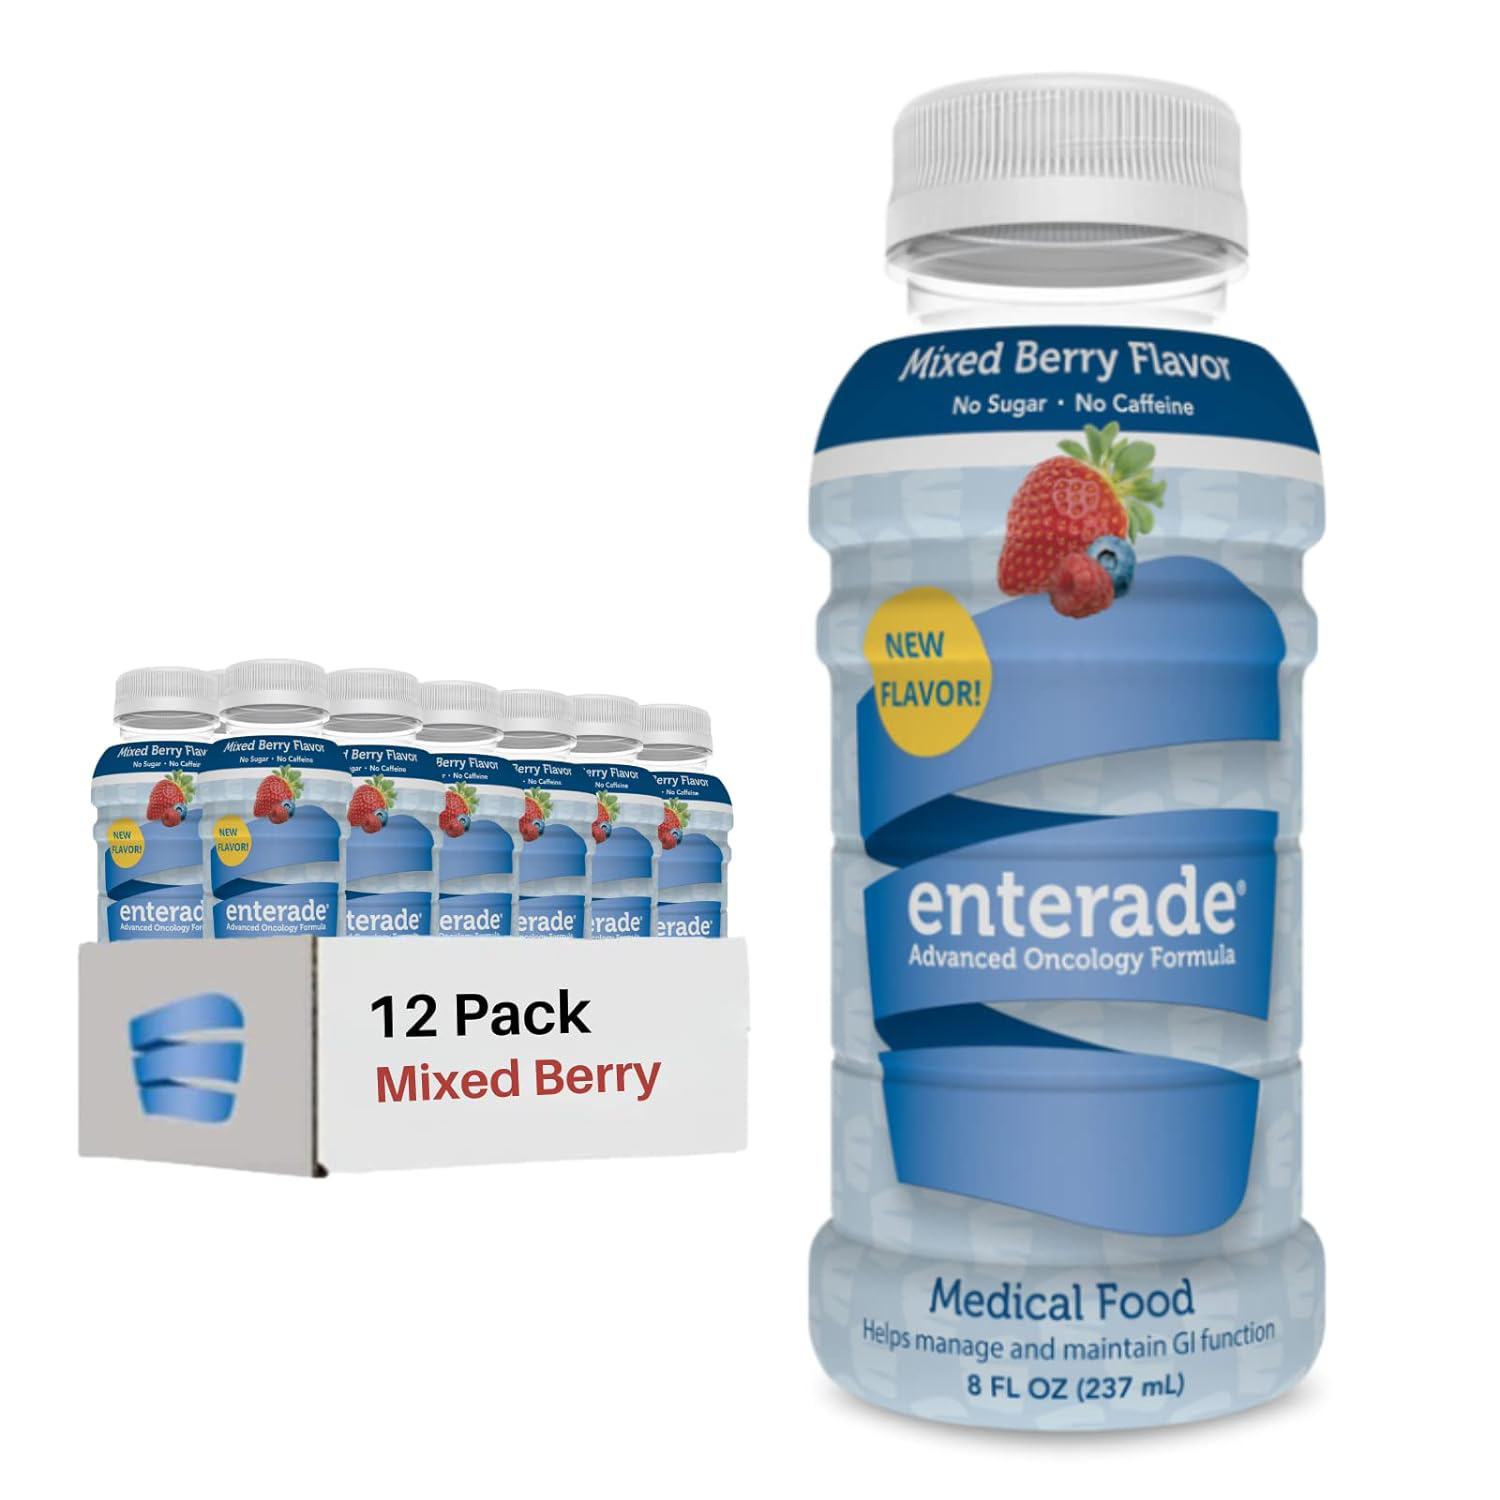 Enterade AO Mixed Berry, 12 Pack, Specially Formulated to Decrease GI Side Care